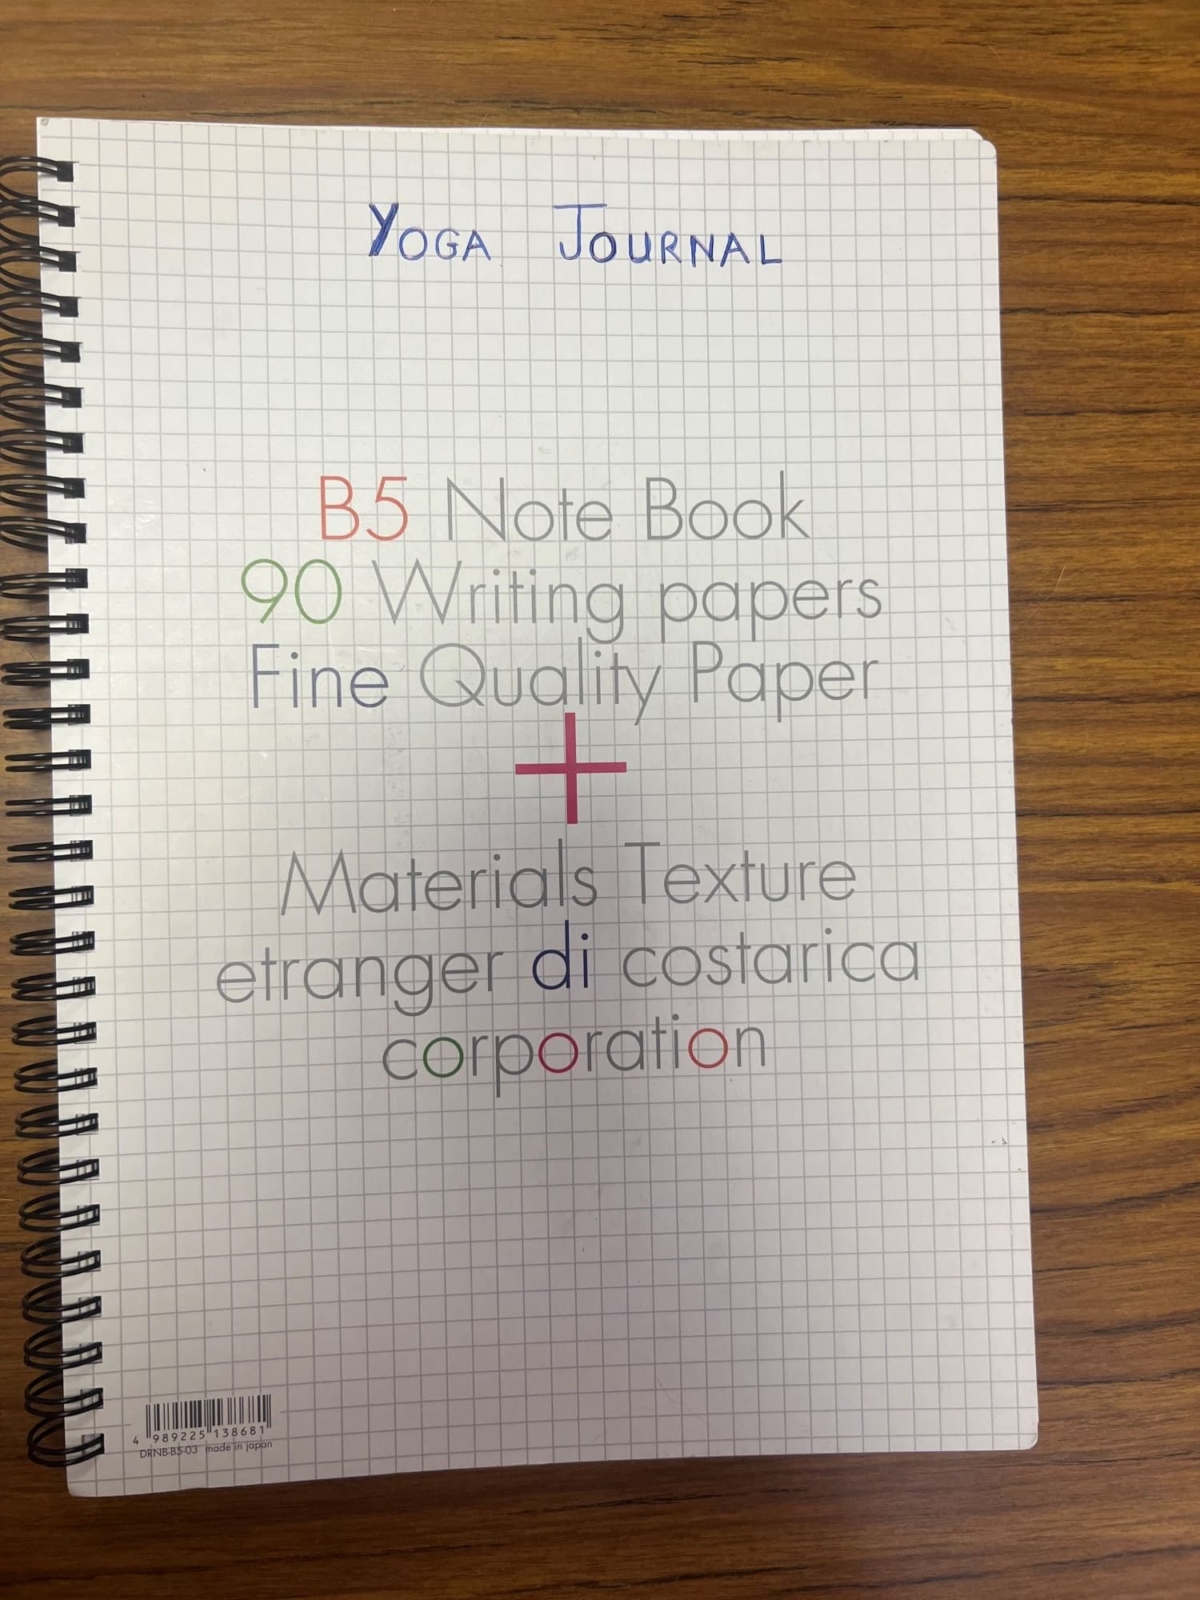 Example of a cheap notebook to use for yoga journaling